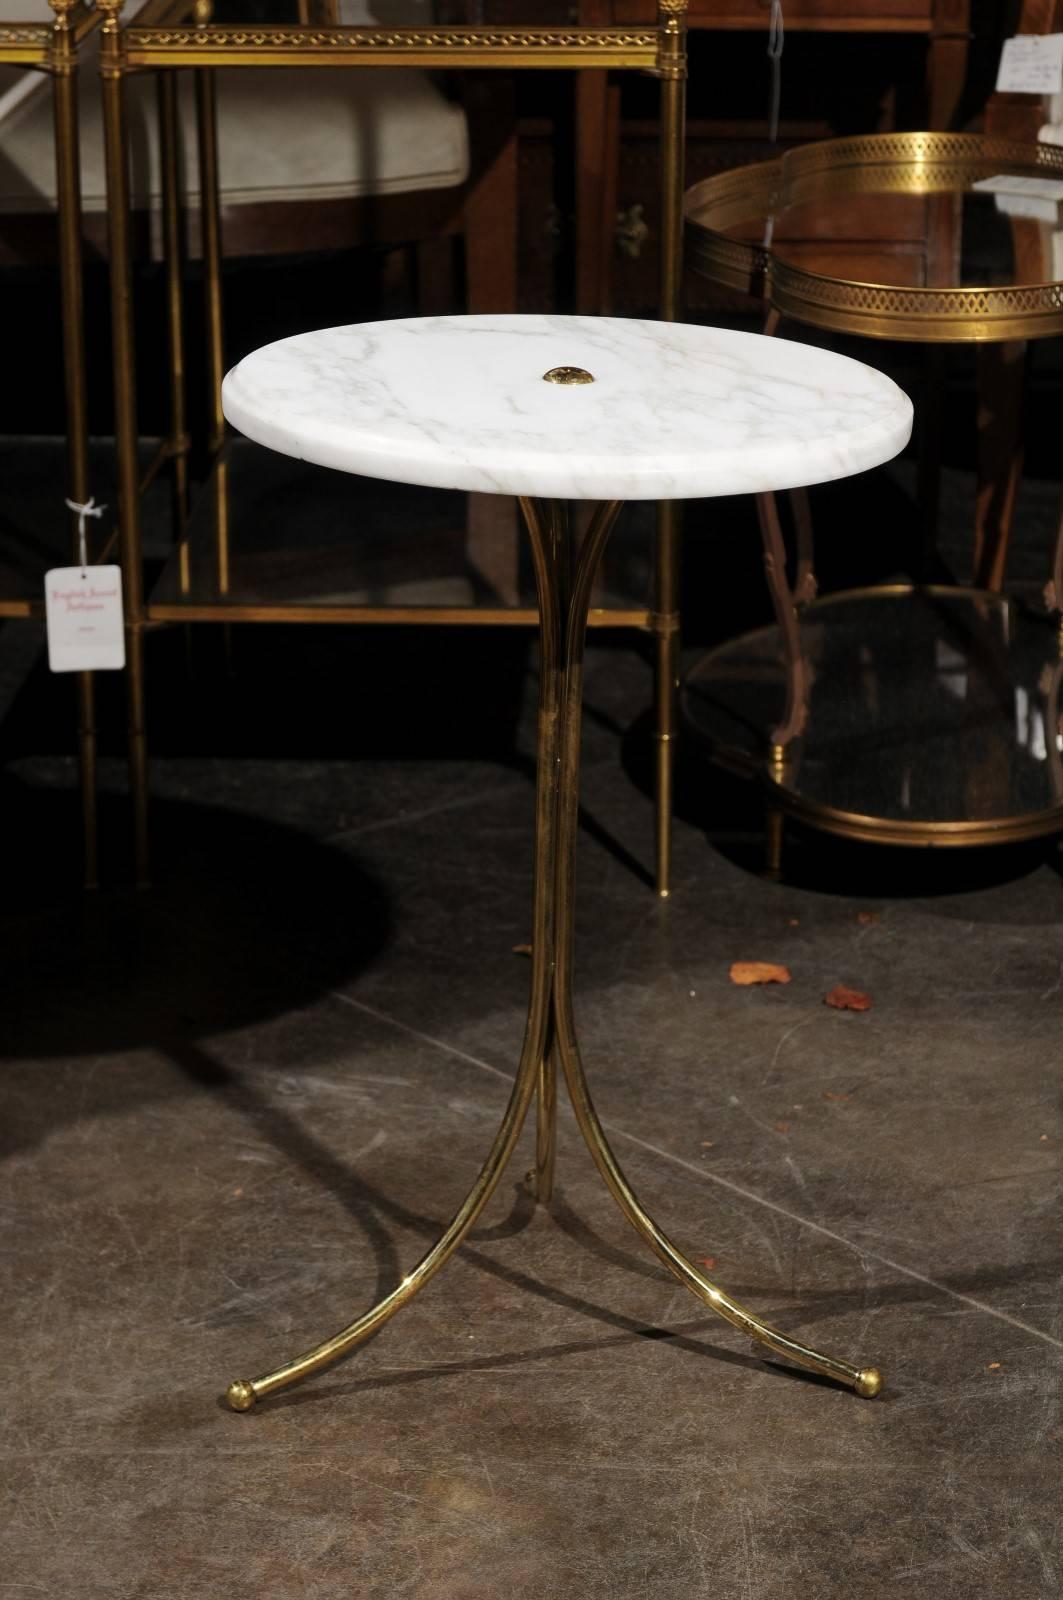 An Italian marble and brass drinks table from the Mid-Century Modern period. This Italian drinks table features a circular white marble top sitting above a brass pedestal base with splayed tripod base. The beauty of the marble top is only